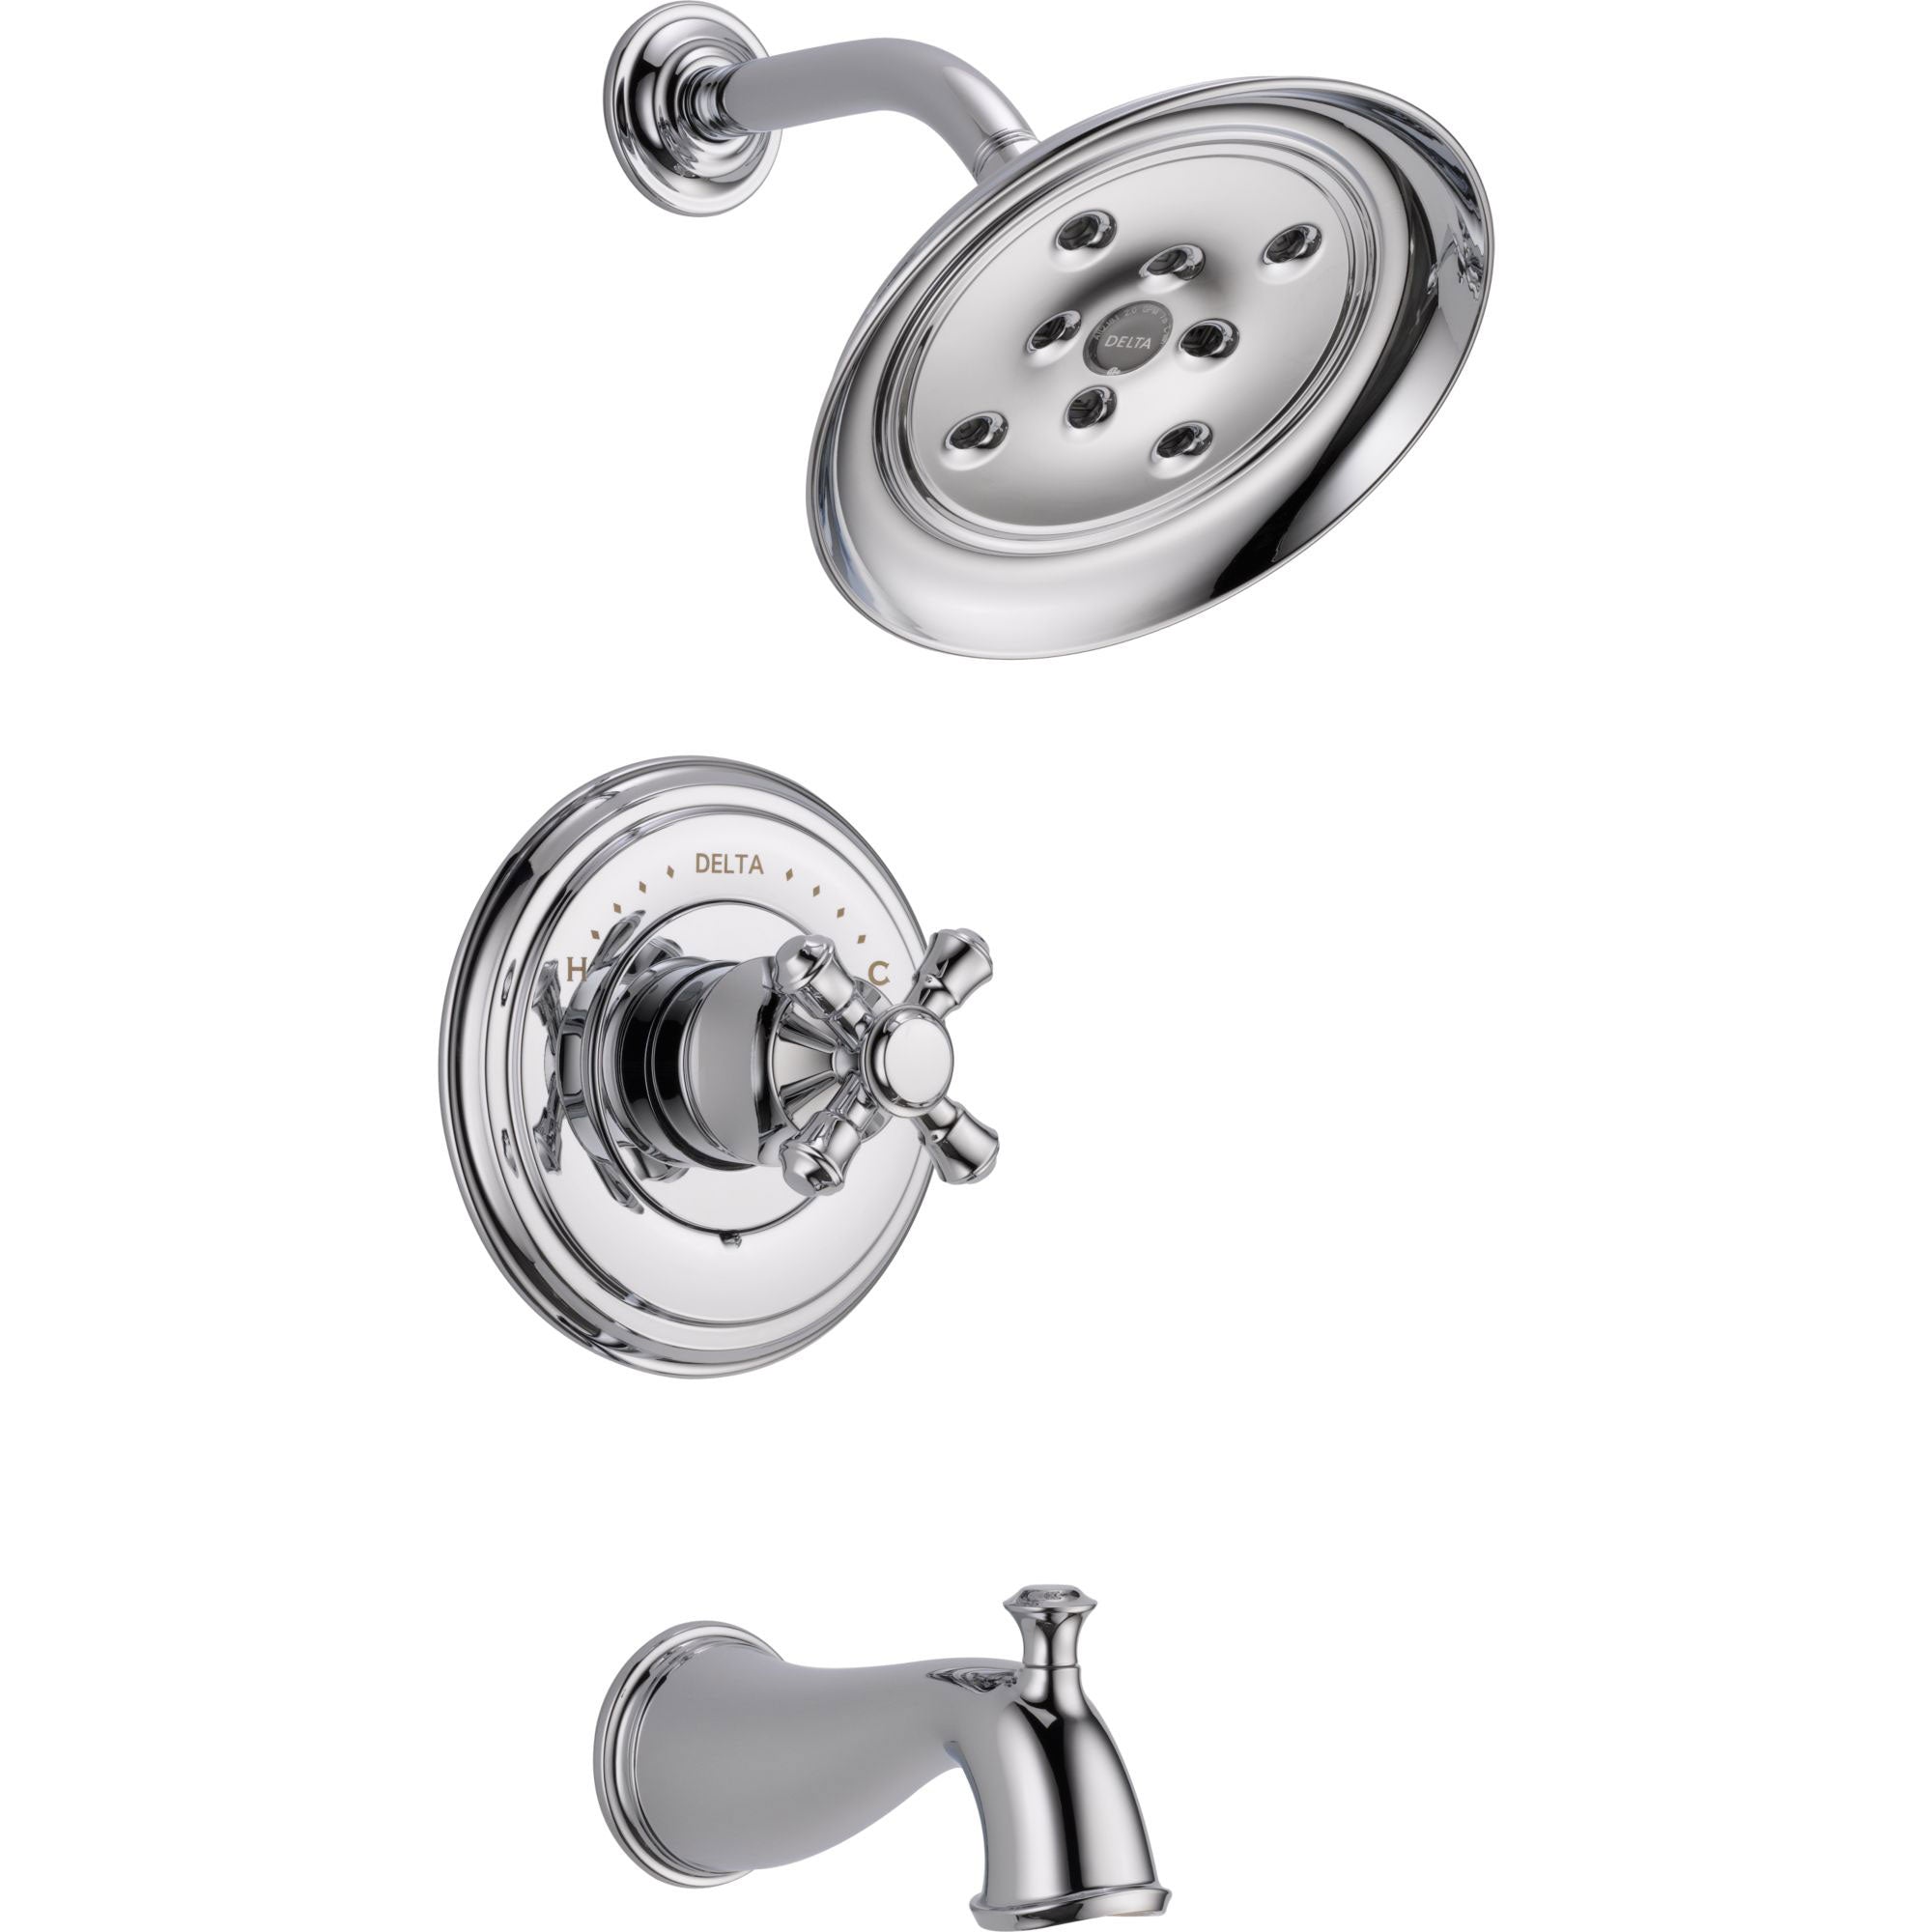 Delta Cassidy Chrome Finish 14 Series Tub and Shower Combination Faucet INCLUDES Rough-in Valve and Single Cross Handle D1166V